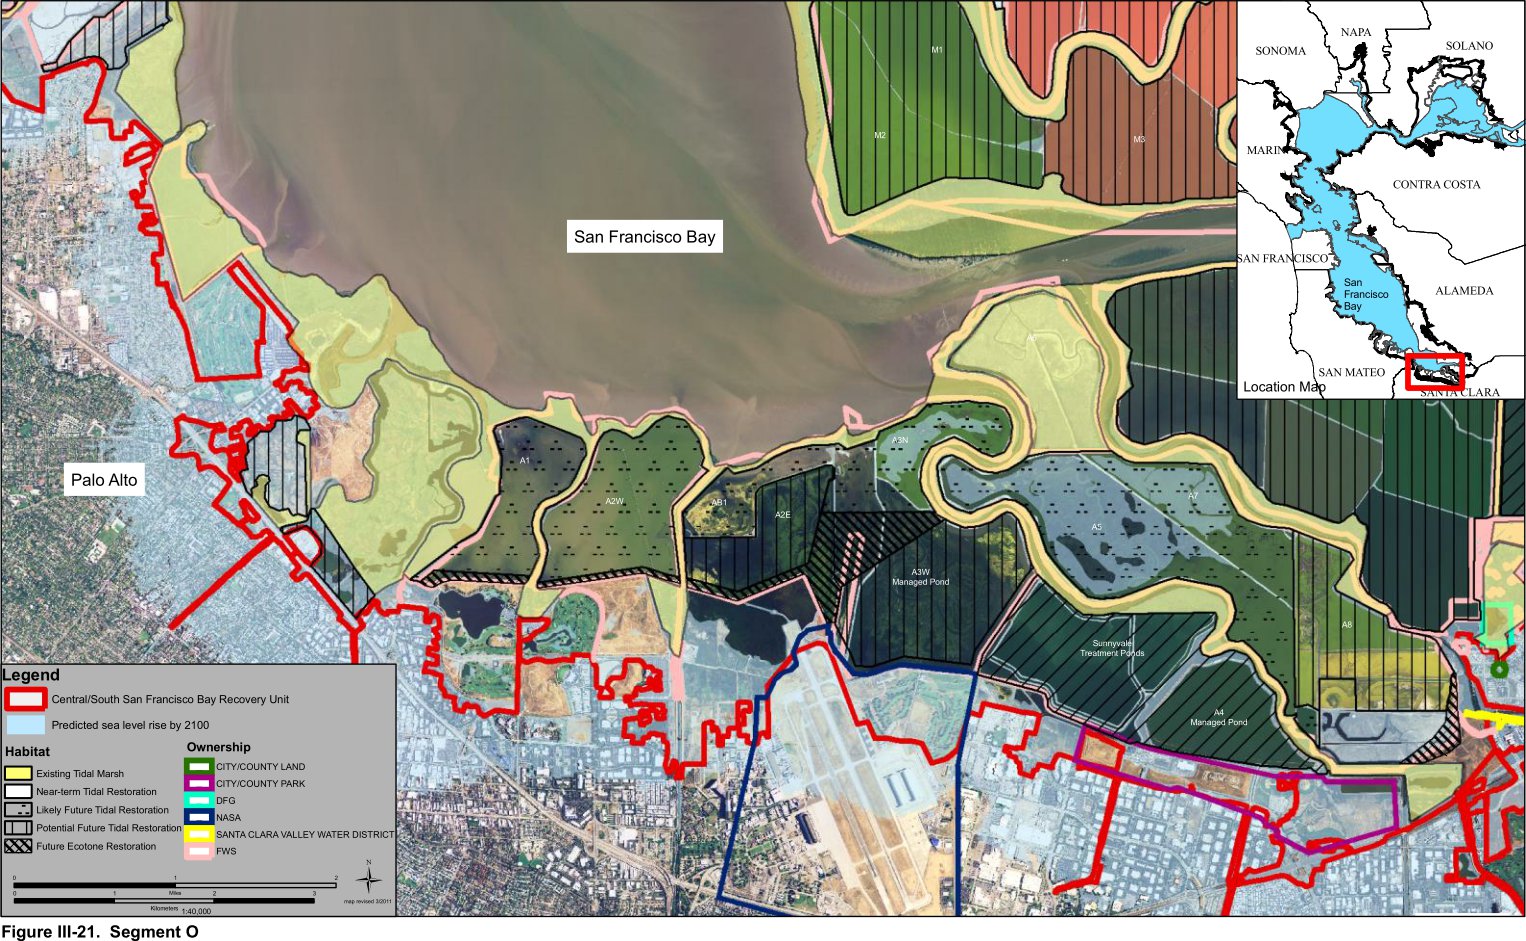 Segment O of the restoration map showing endangered species habitat along the southern part of San Francisco Bay along with land ownership distribution and predicted sea level rise by year 2100